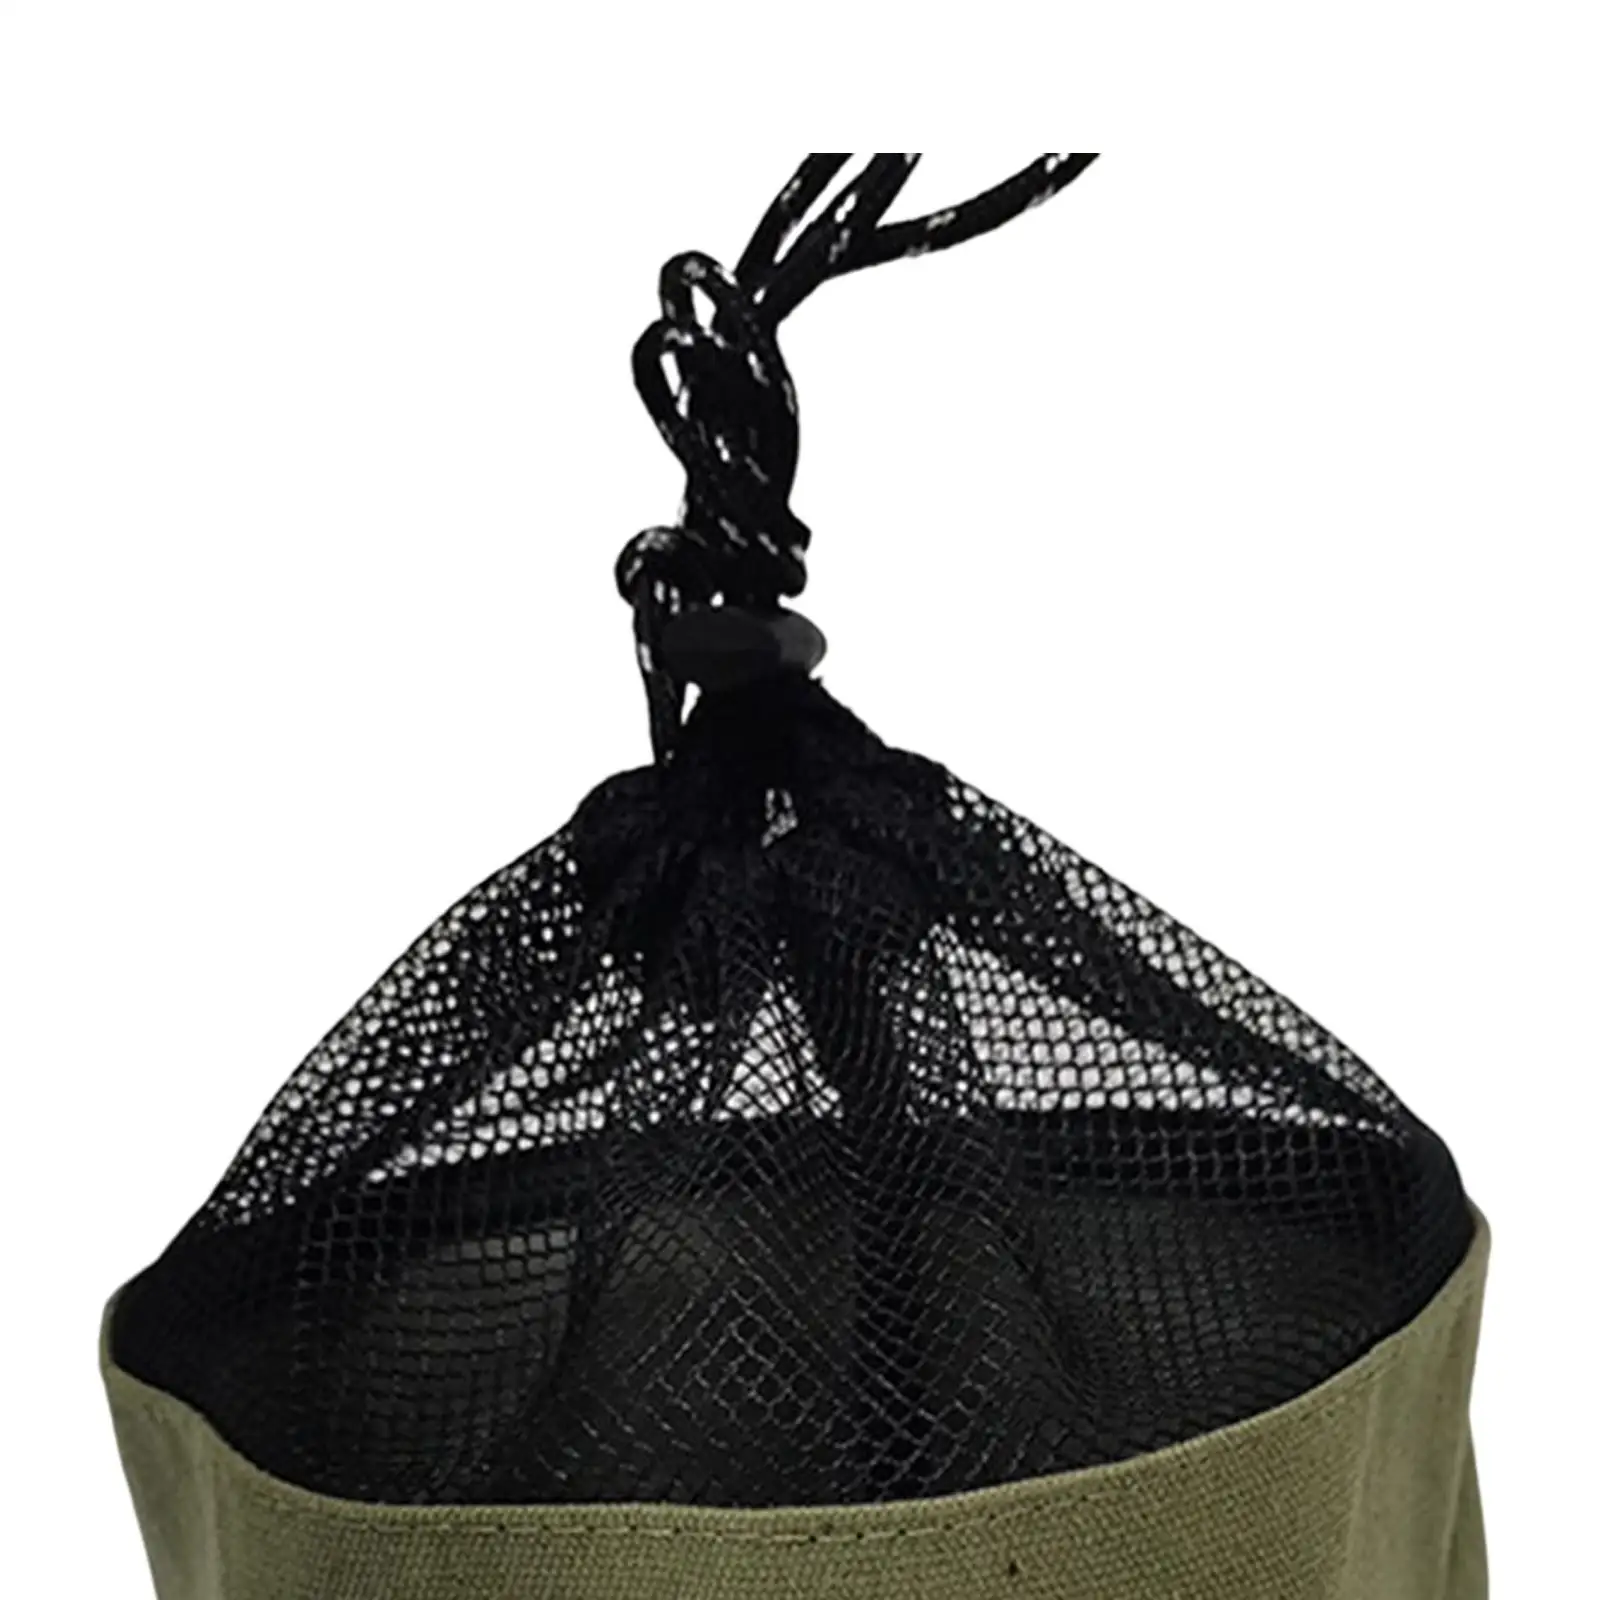 Portable Camping Cookware Storage Bag Case Drawstring Bag Pouch Tote Tableware Storage for Outdoor Cooking Barbecue